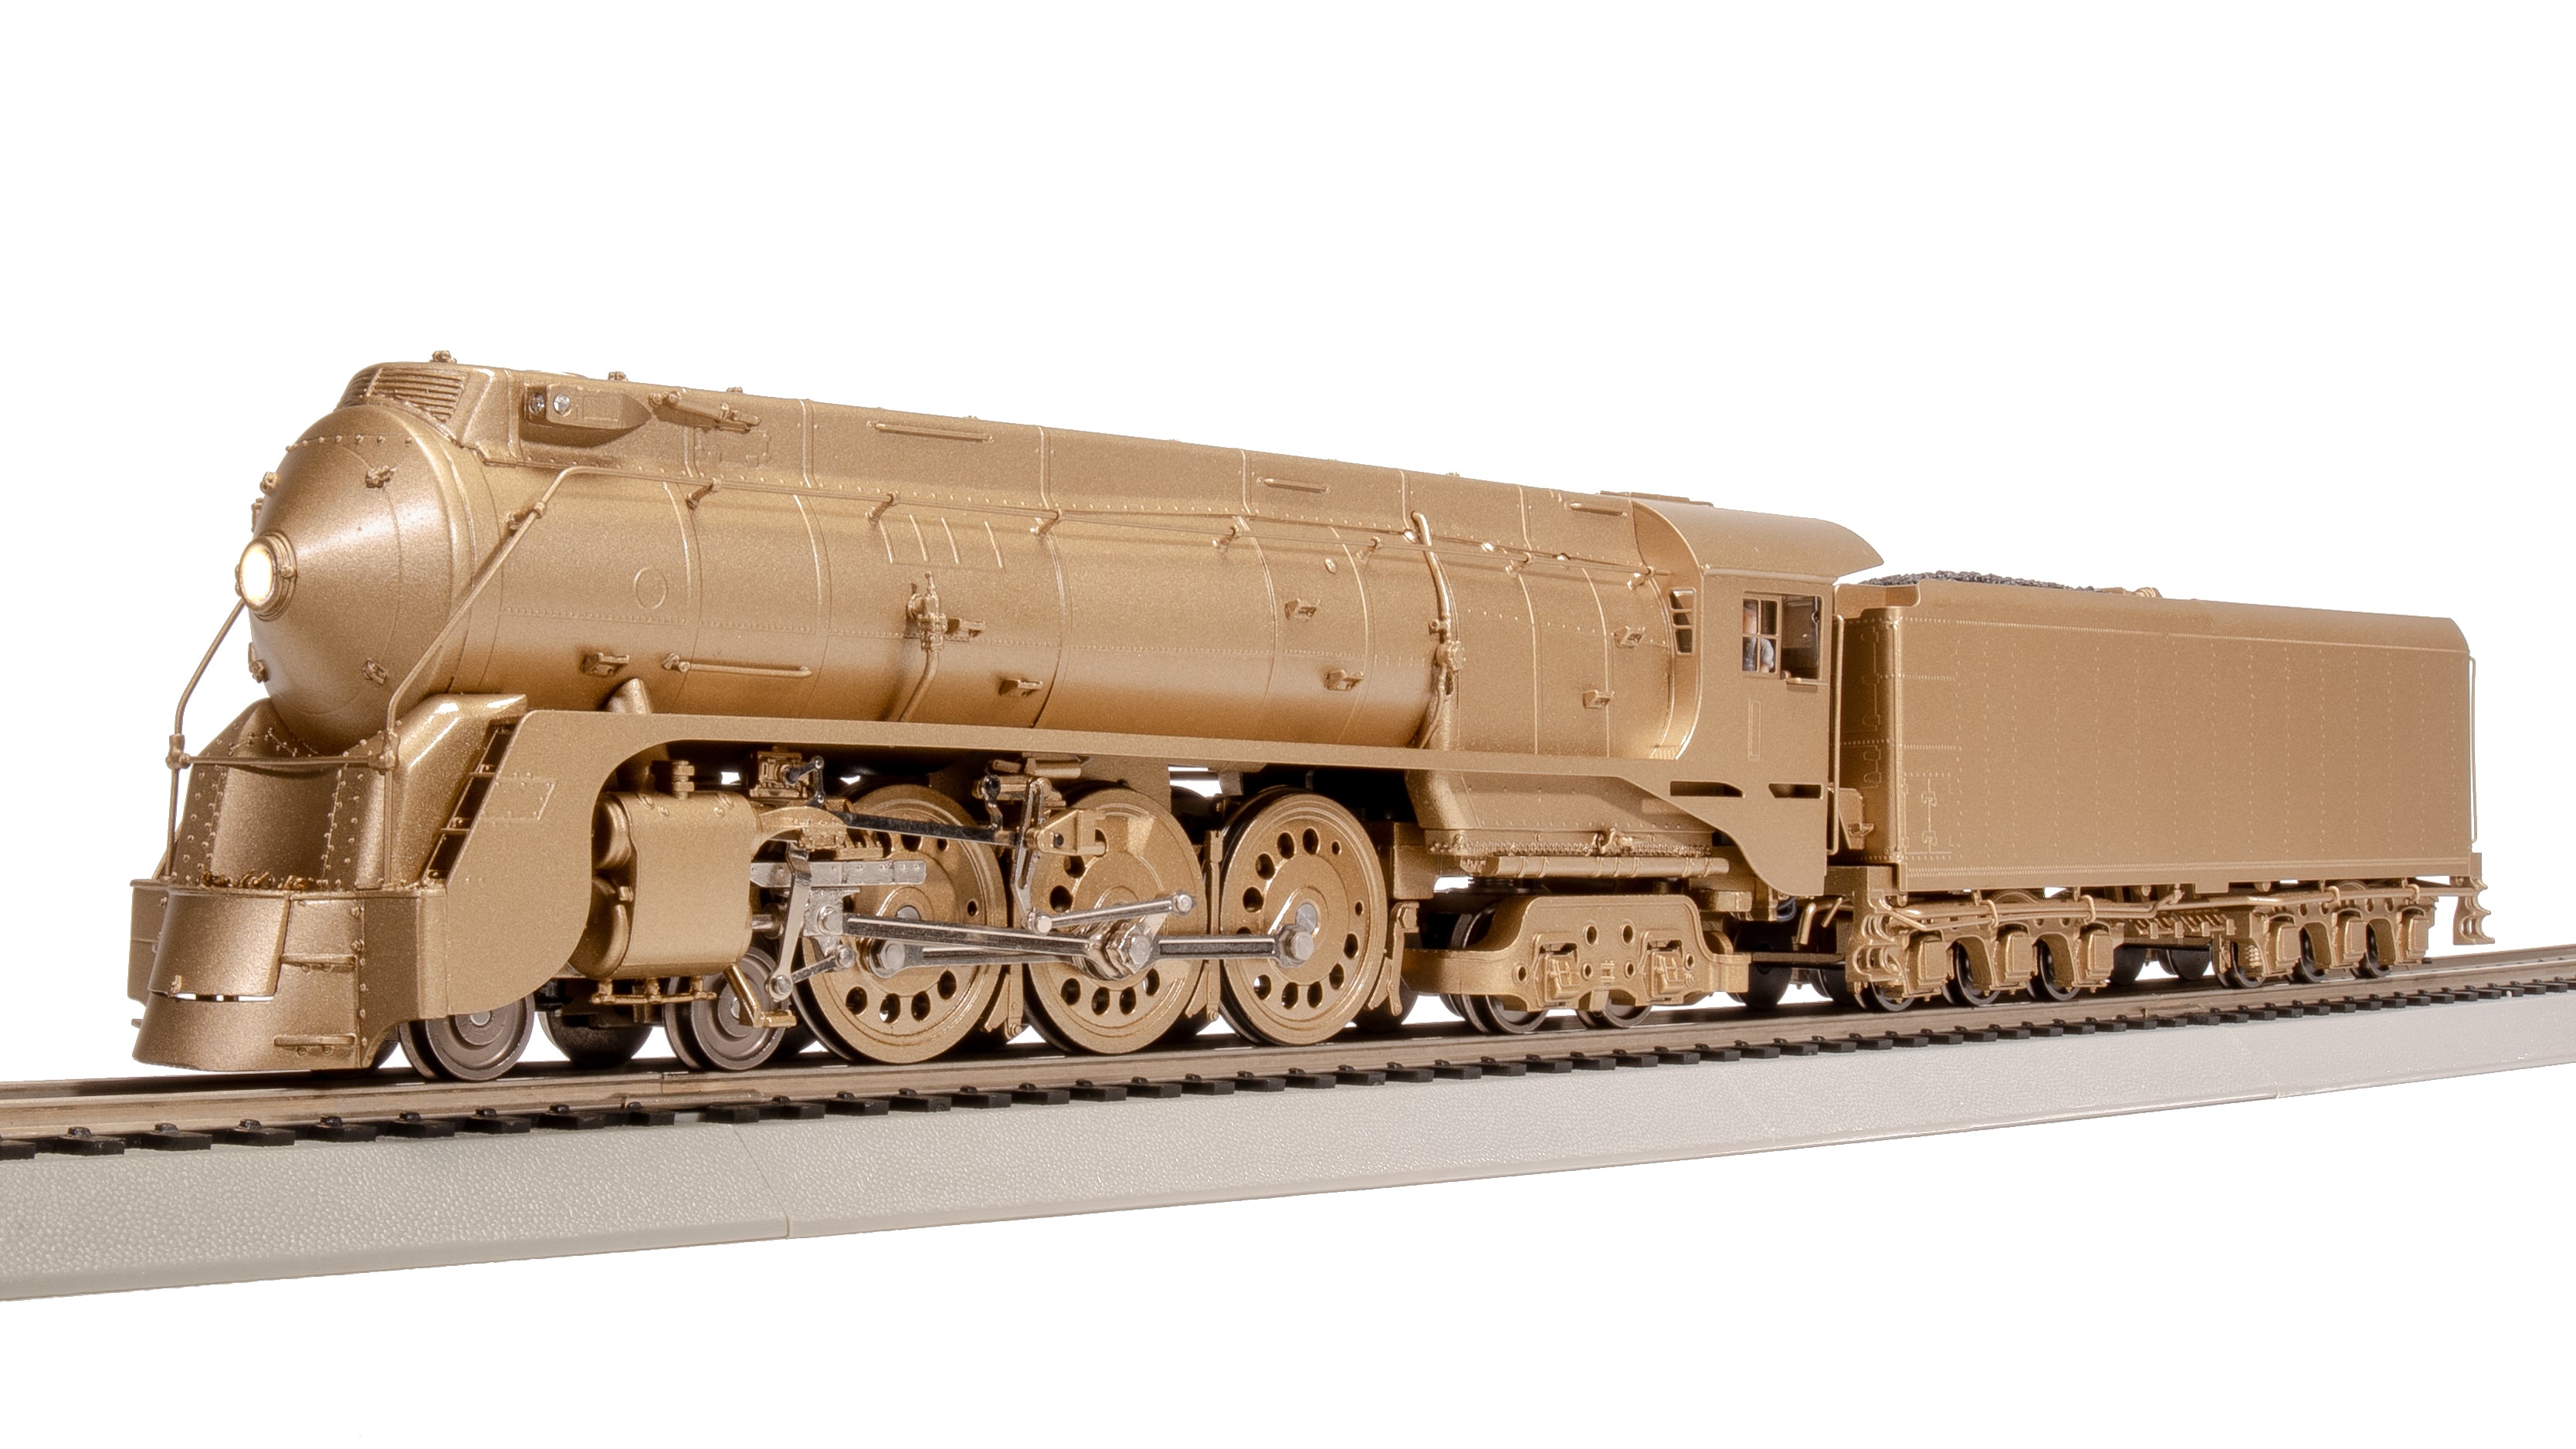 7878 New Haven I-5, Unlettered / Painted Brass, Paragon4 Sound/DC/DCC, Smoke, HO